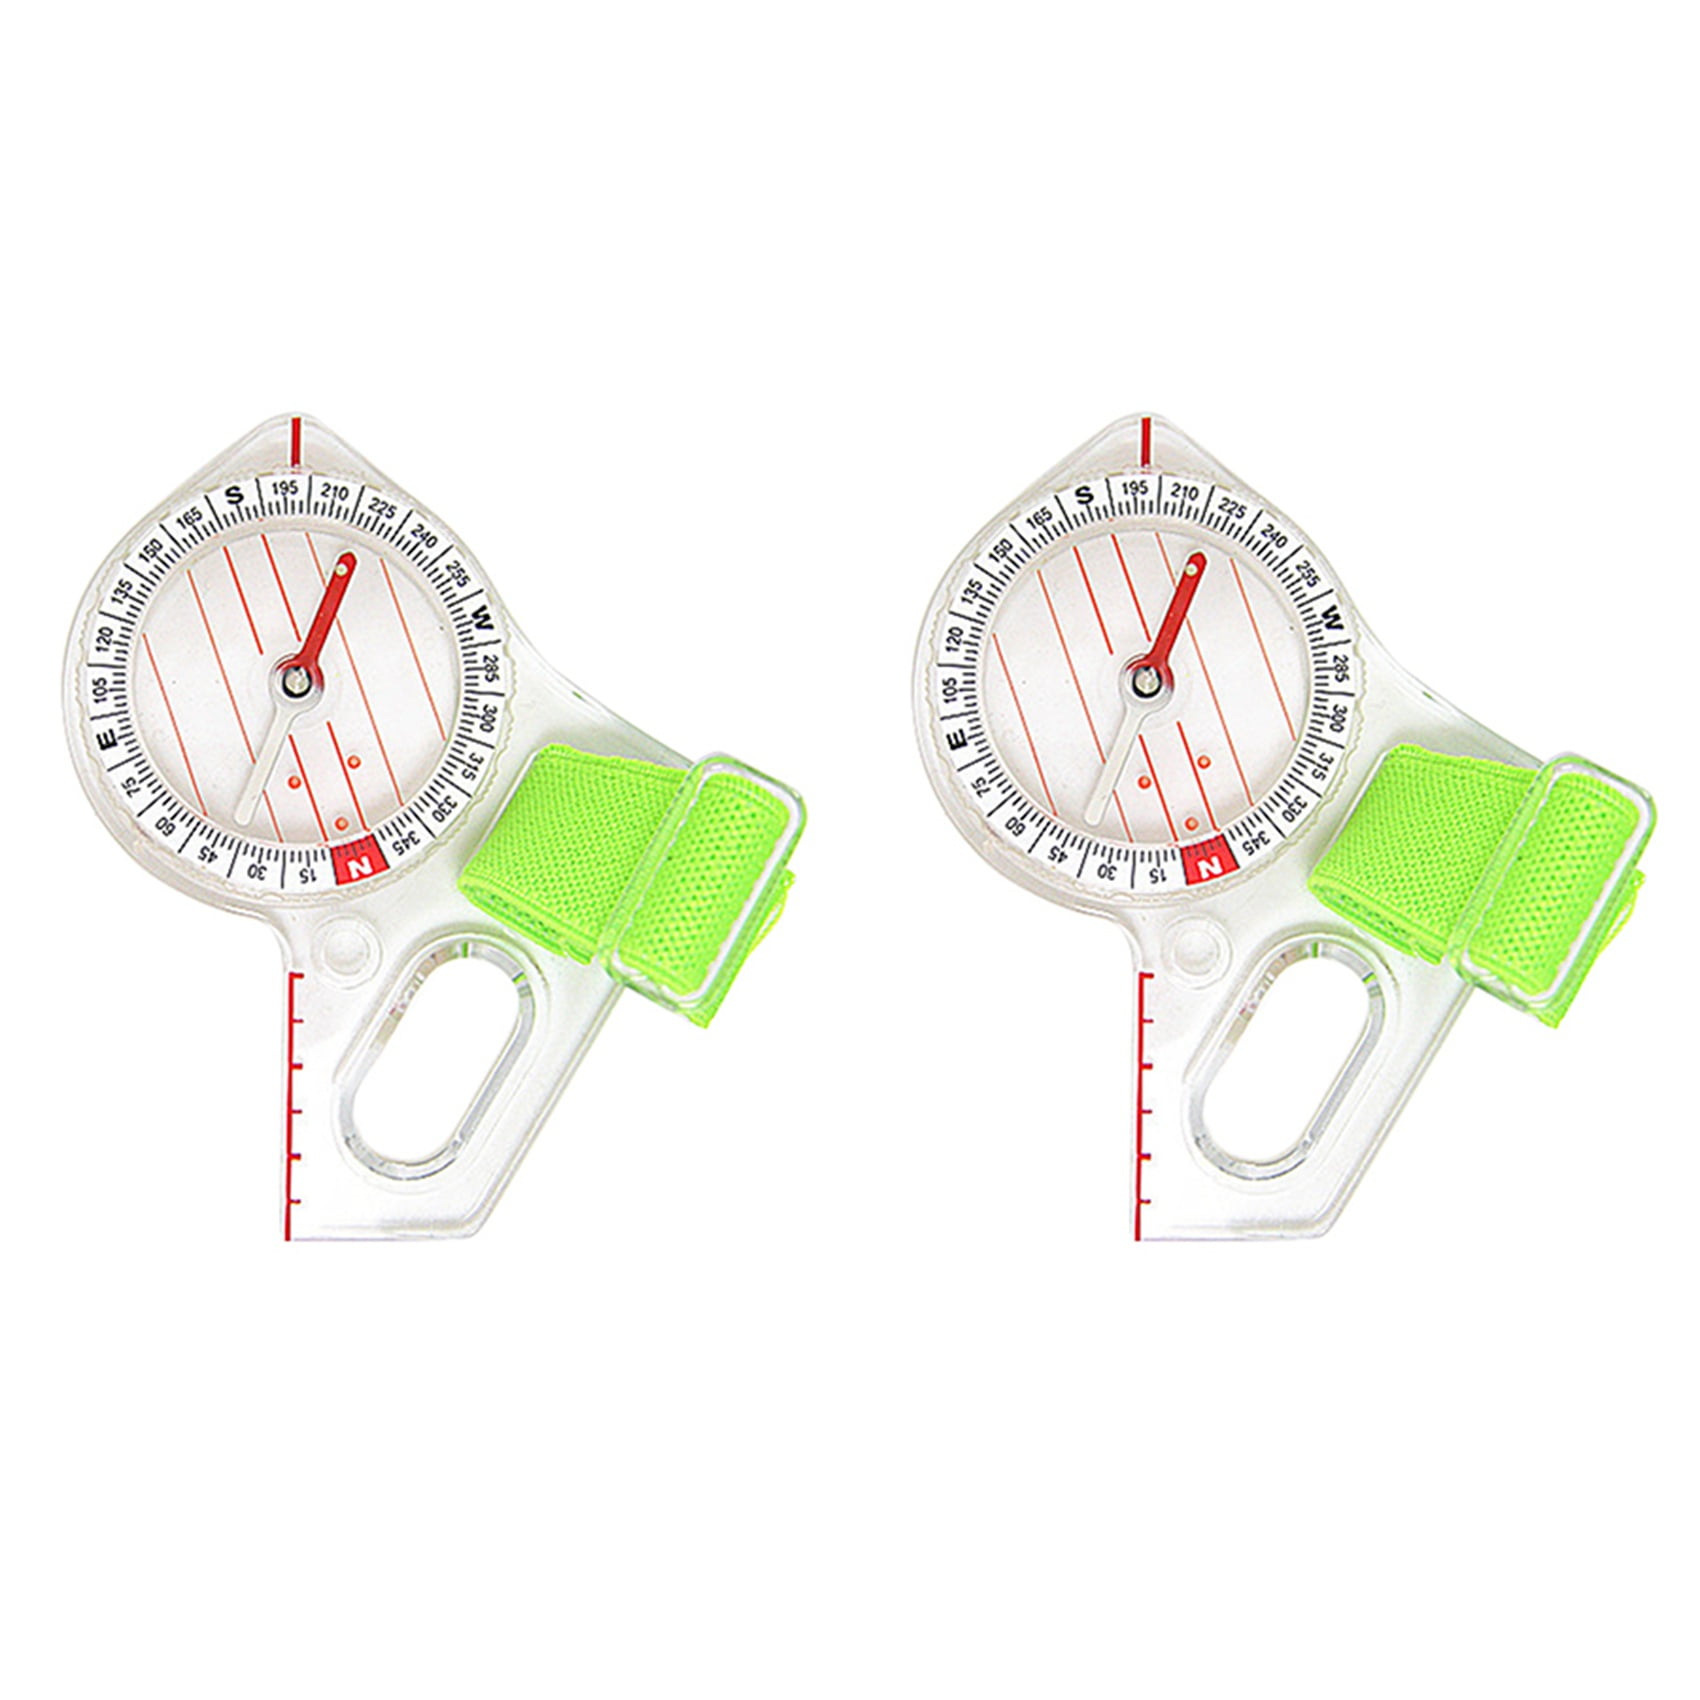 SNOWINSPRING 2X Professional Outdoor Thumb Compass Competition Elite Direction Compass Portable Map - Walmart.com